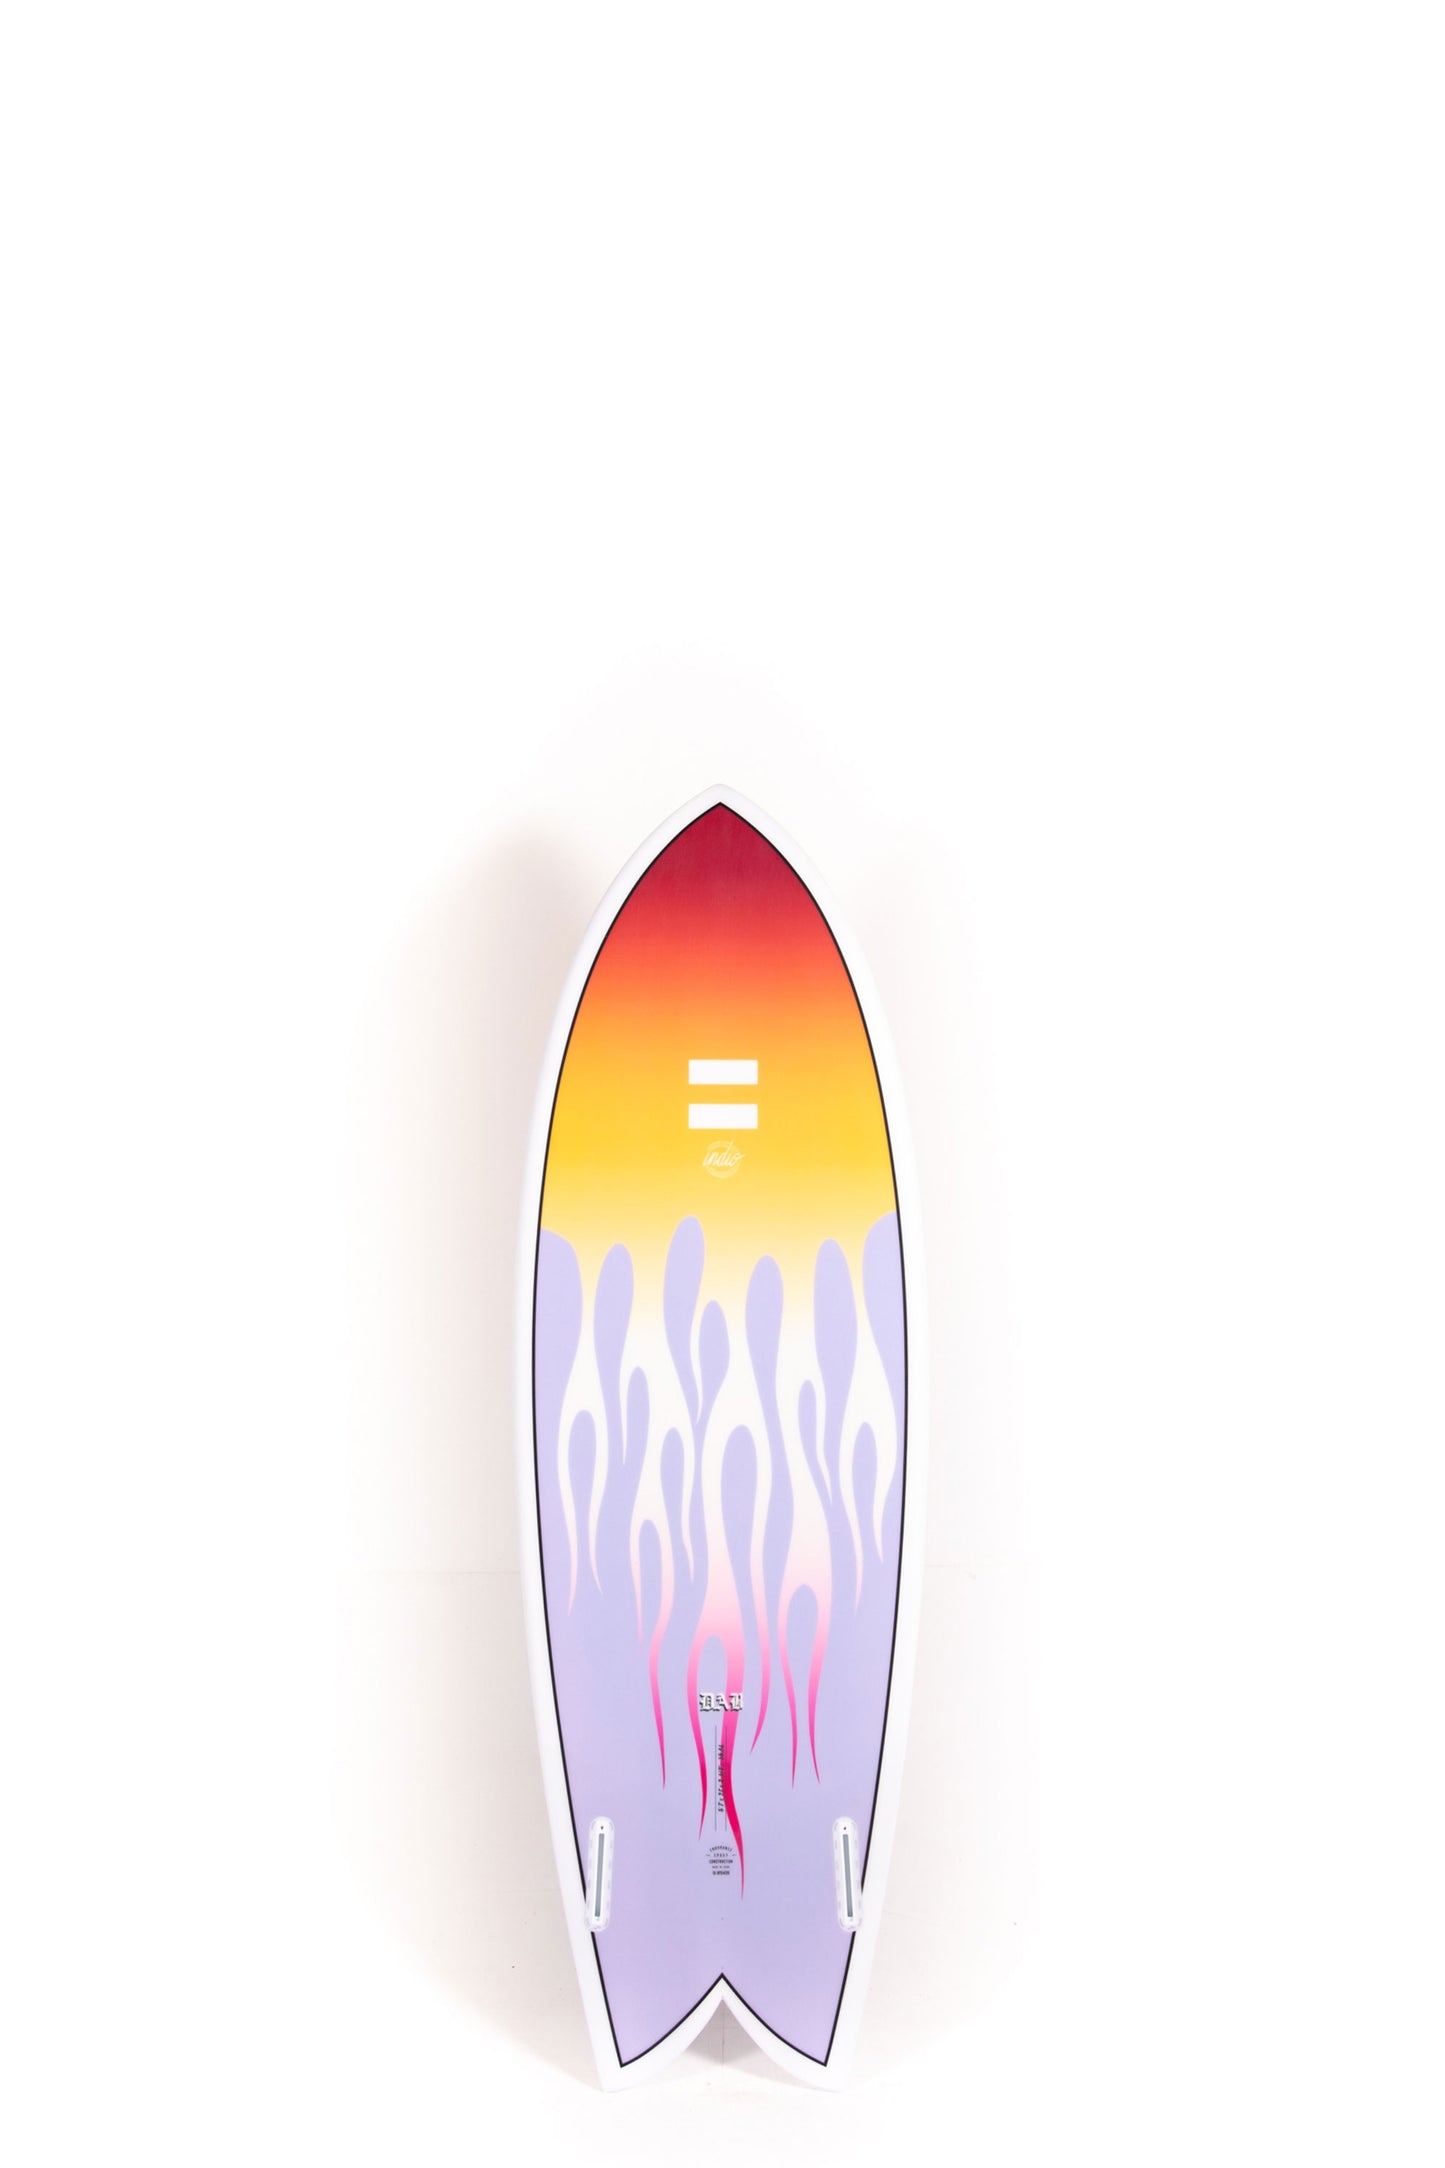 Pukas-Surf-Shop-Indio-Surfboards-Dab-fire-5_7